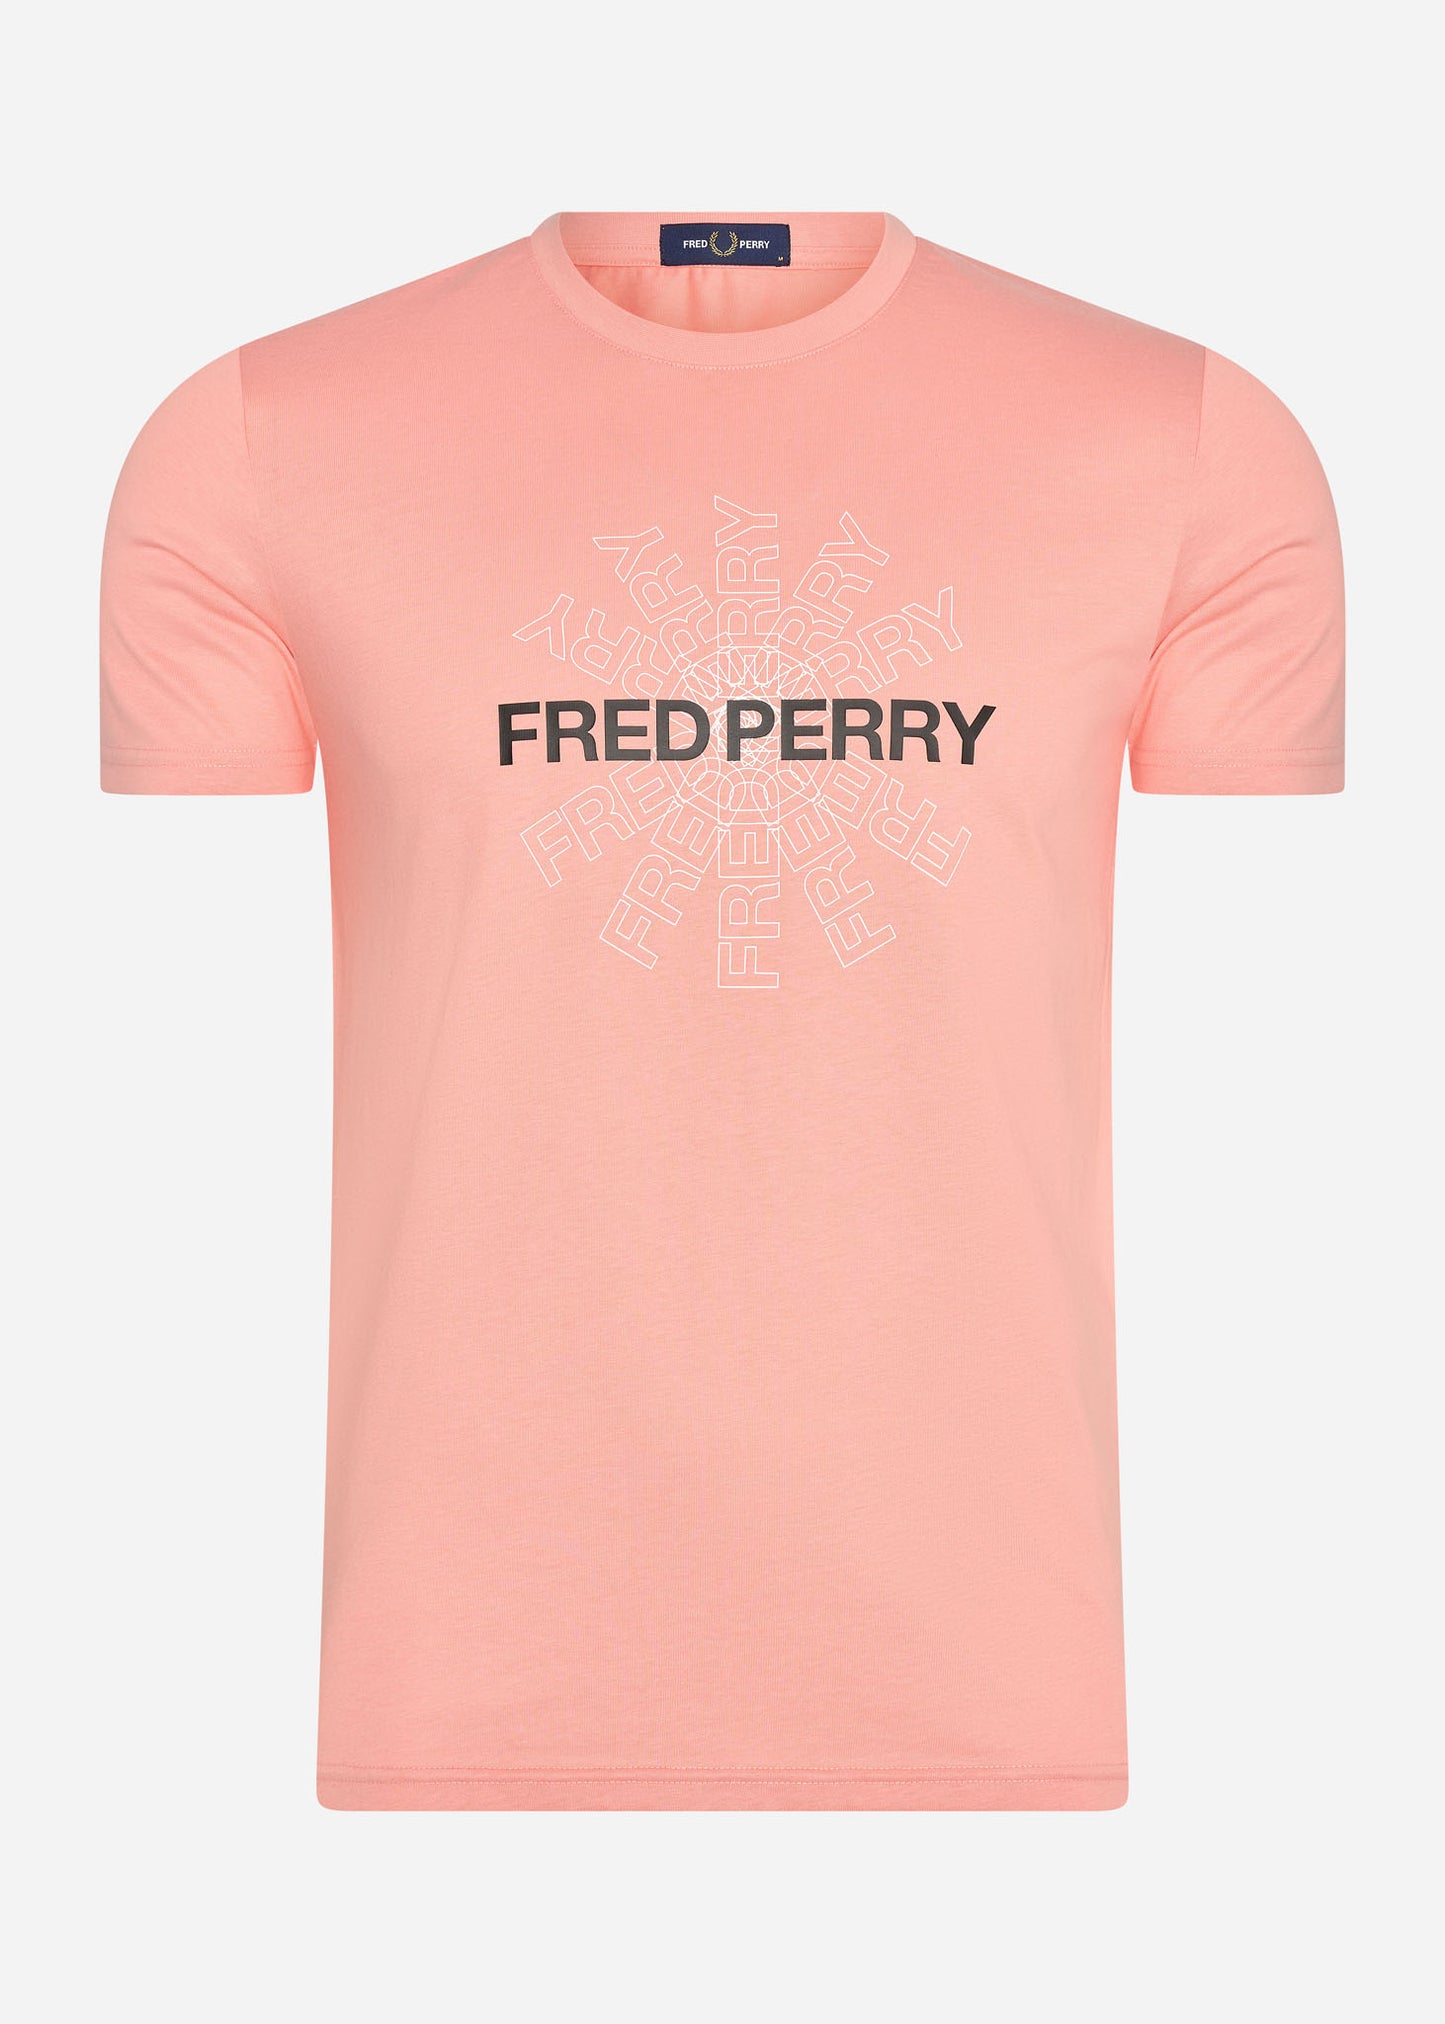 Fred Perry T-shirts  Fred perry graphic t-shirt - pink peach 